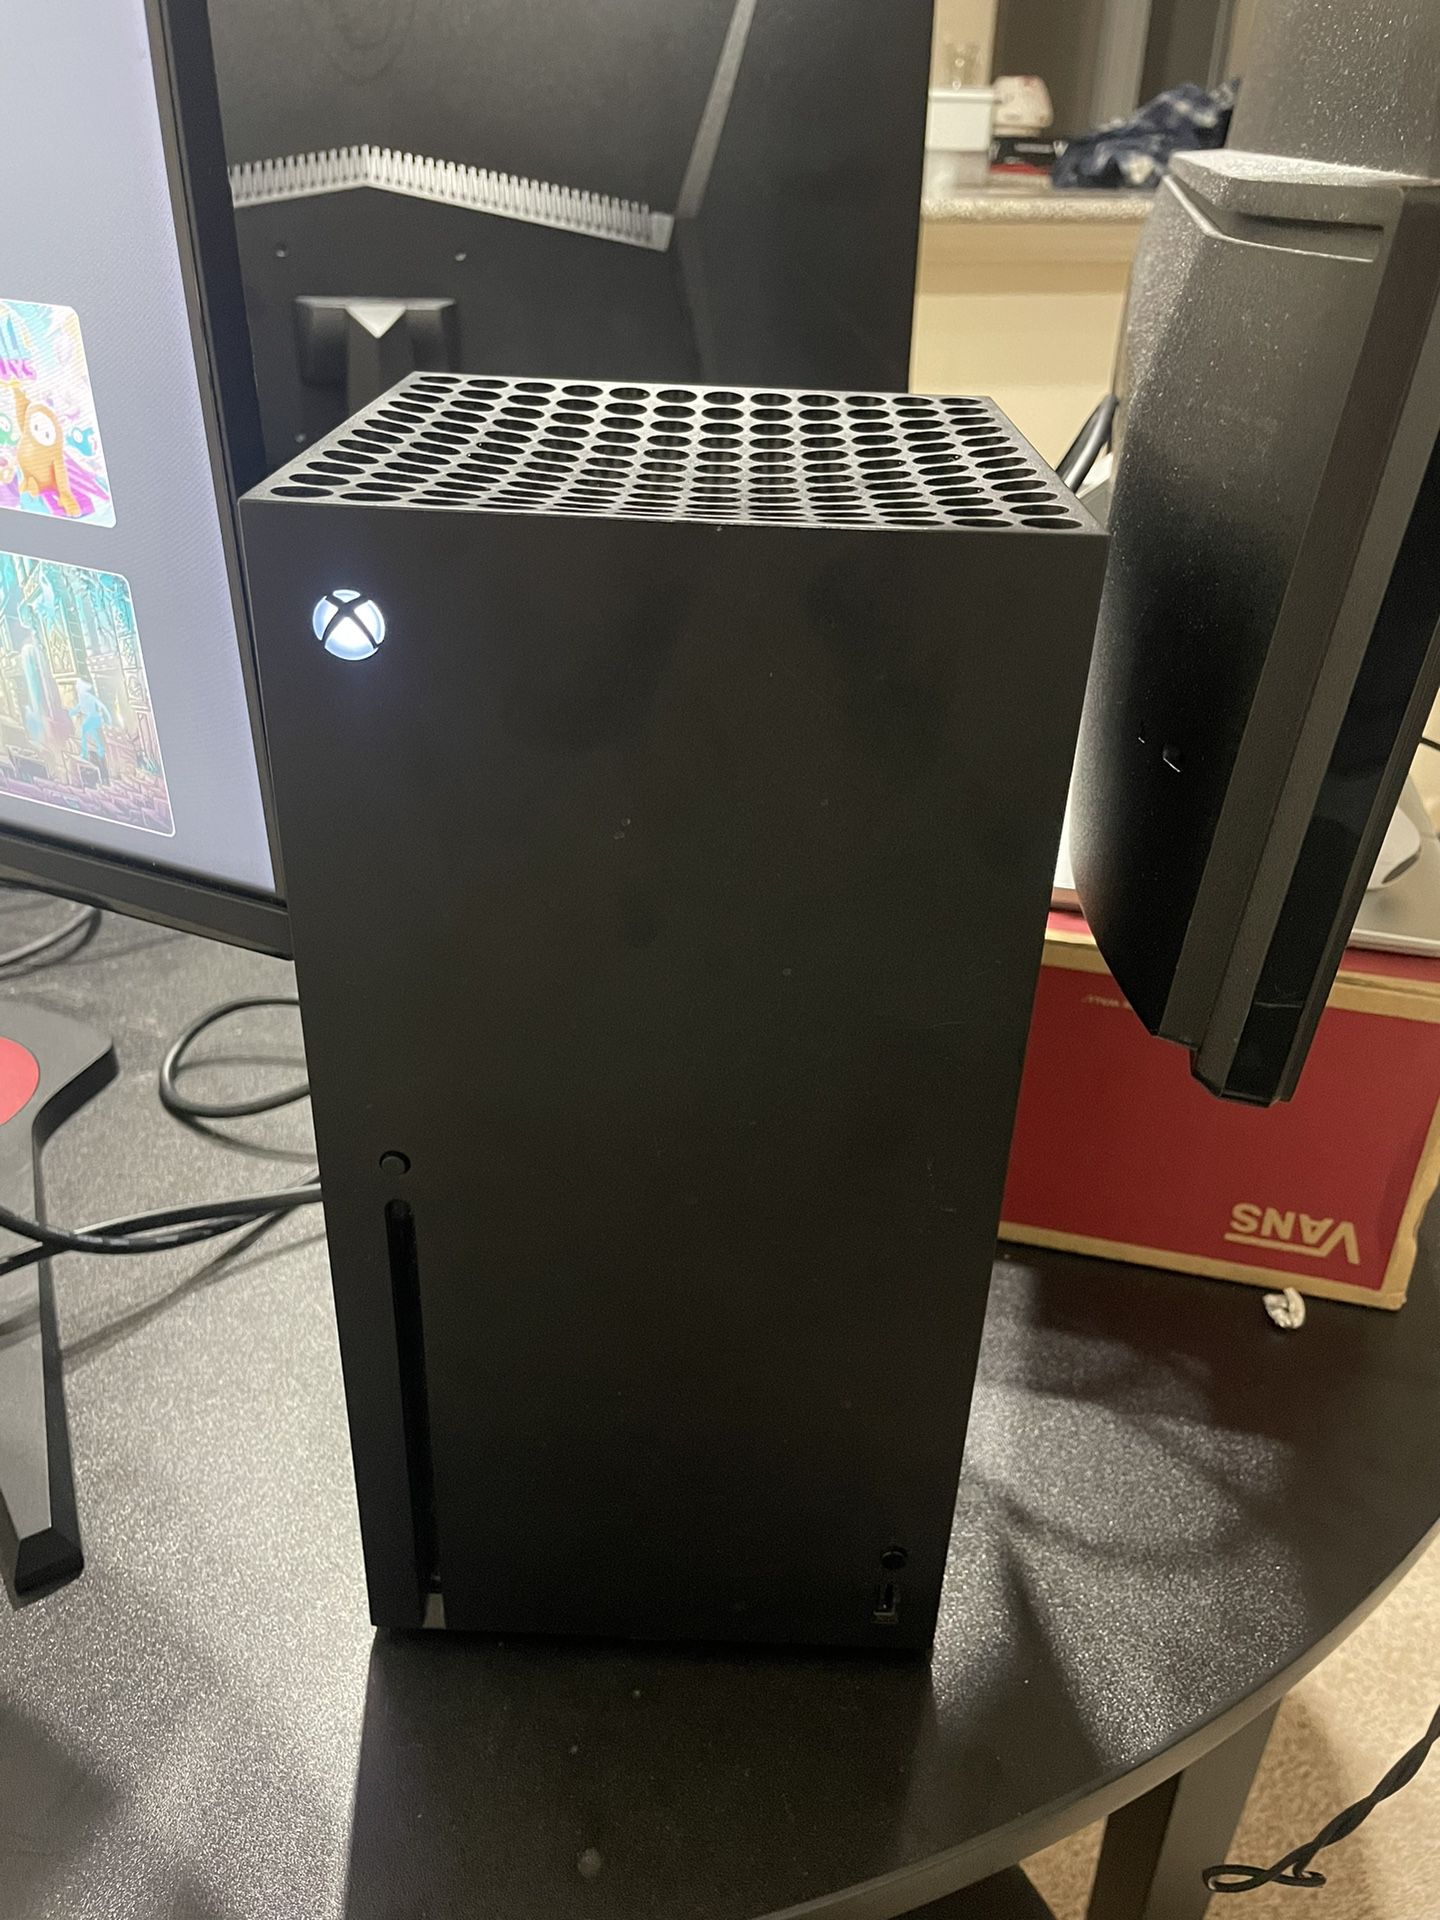 Xbox Series X With 2 Series X Controllers And A Turtle Beach Headset